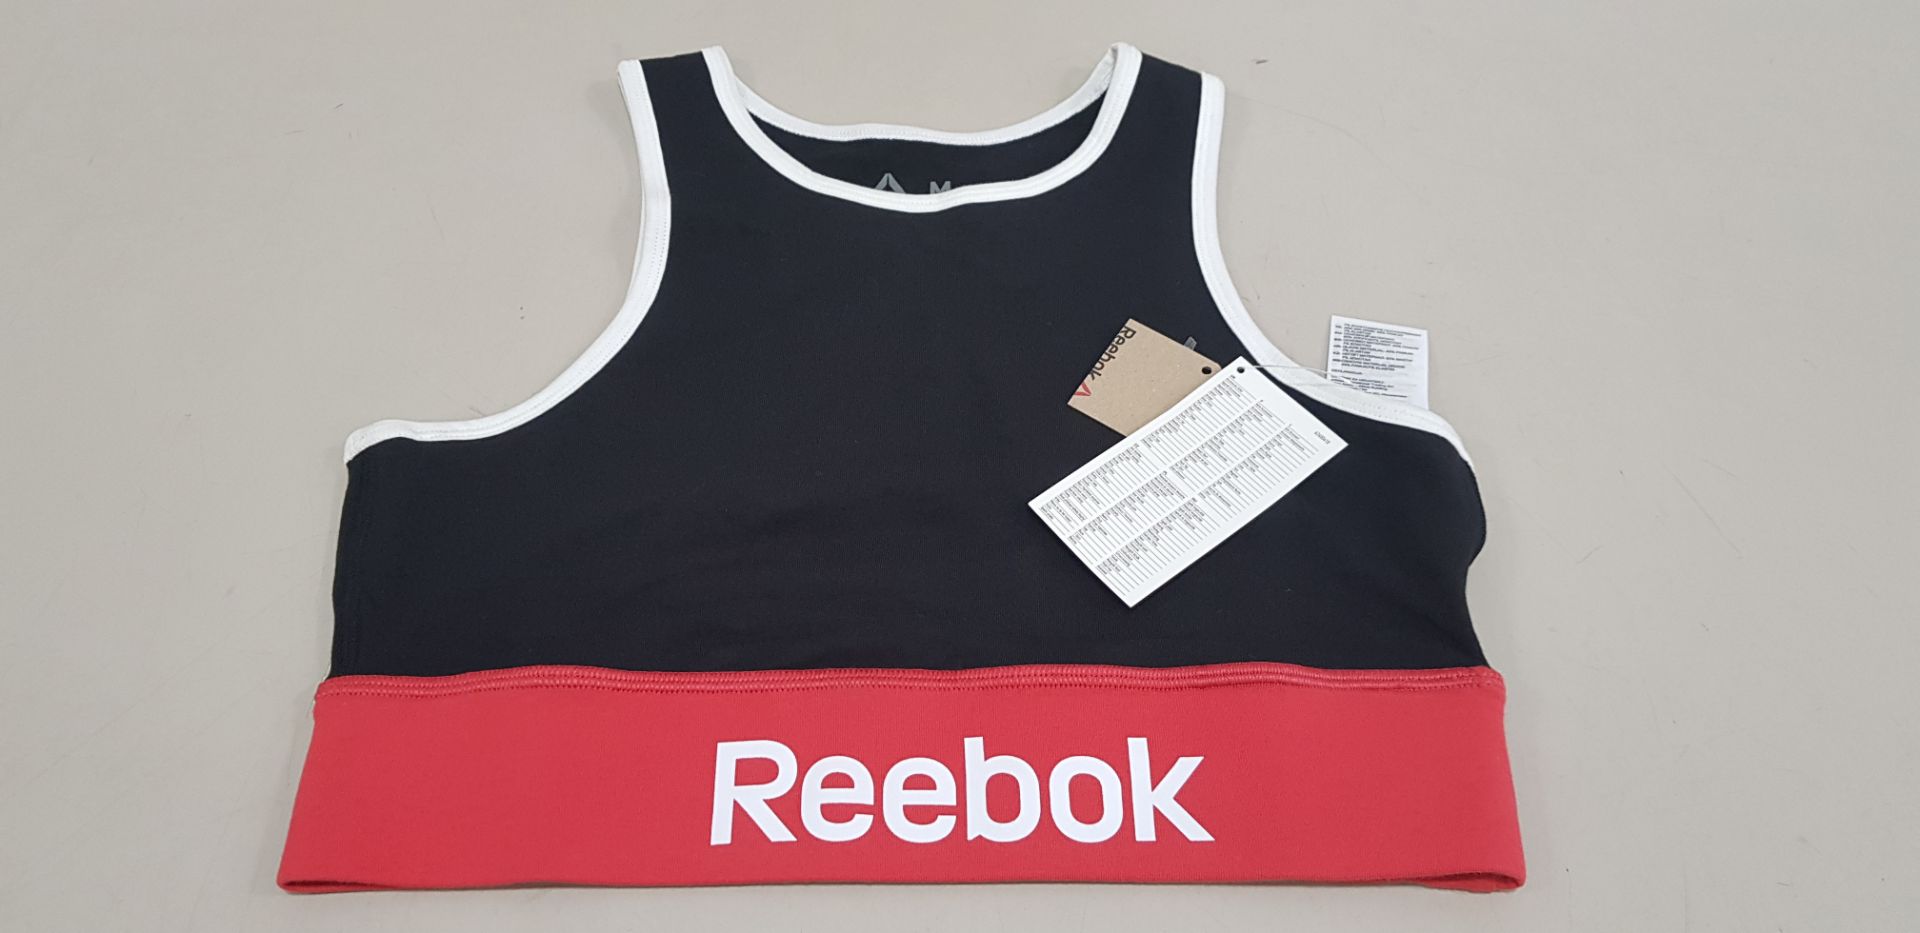 20 X BRAND NEW REEBOK LINEAR LOGO COTTON BRA IN RED AND BLACK (SIZE M) - PICK LOOSE